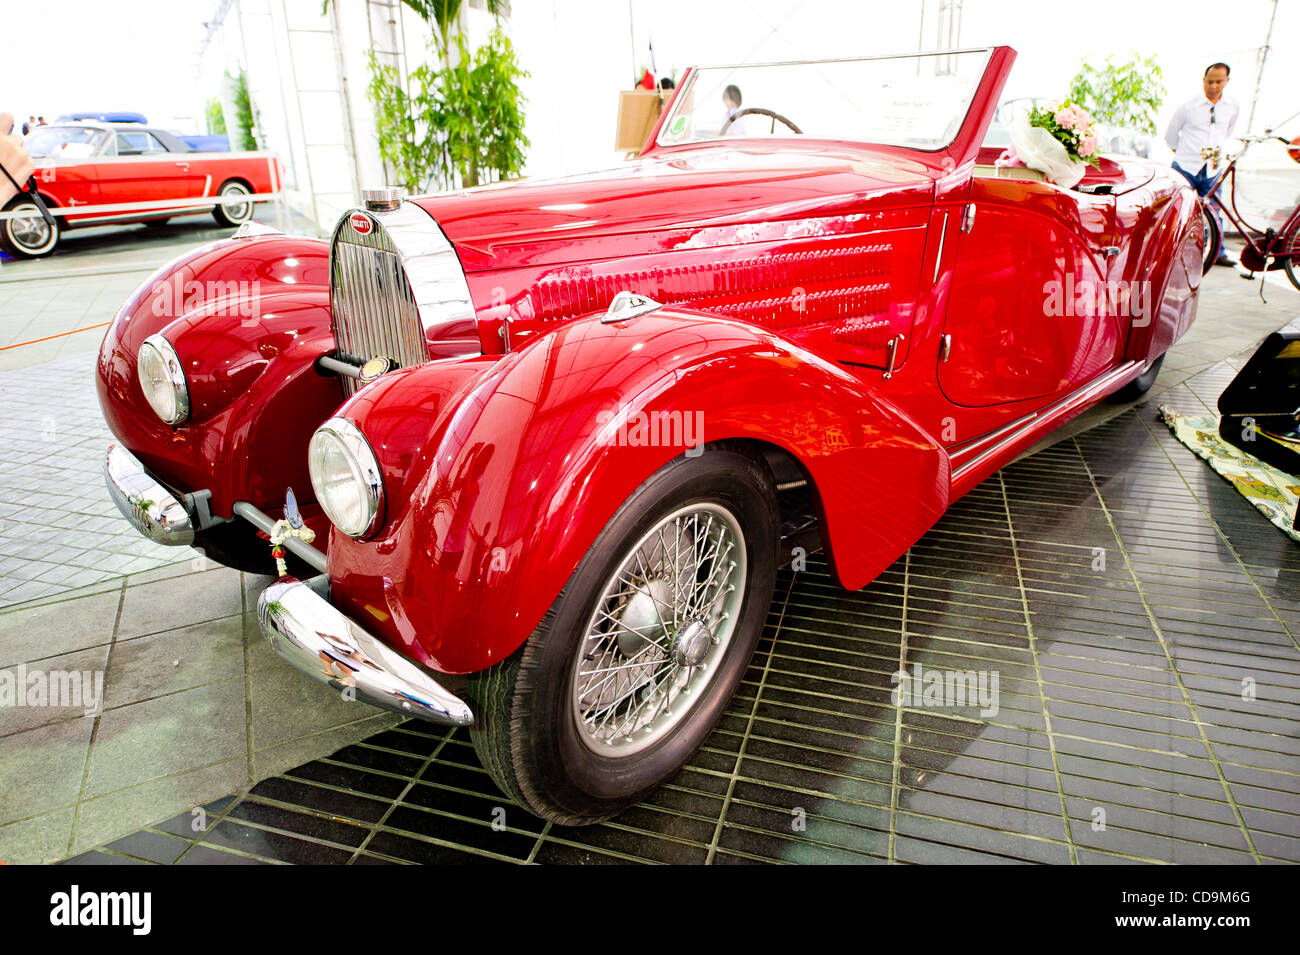 July 16, 2010 - Pathum Thani, Thailand - A 1938 Bugatti Type 57 on display  with other vintage and classic cars at the 34th Vintage Car Concours .  Vintage Car Club of